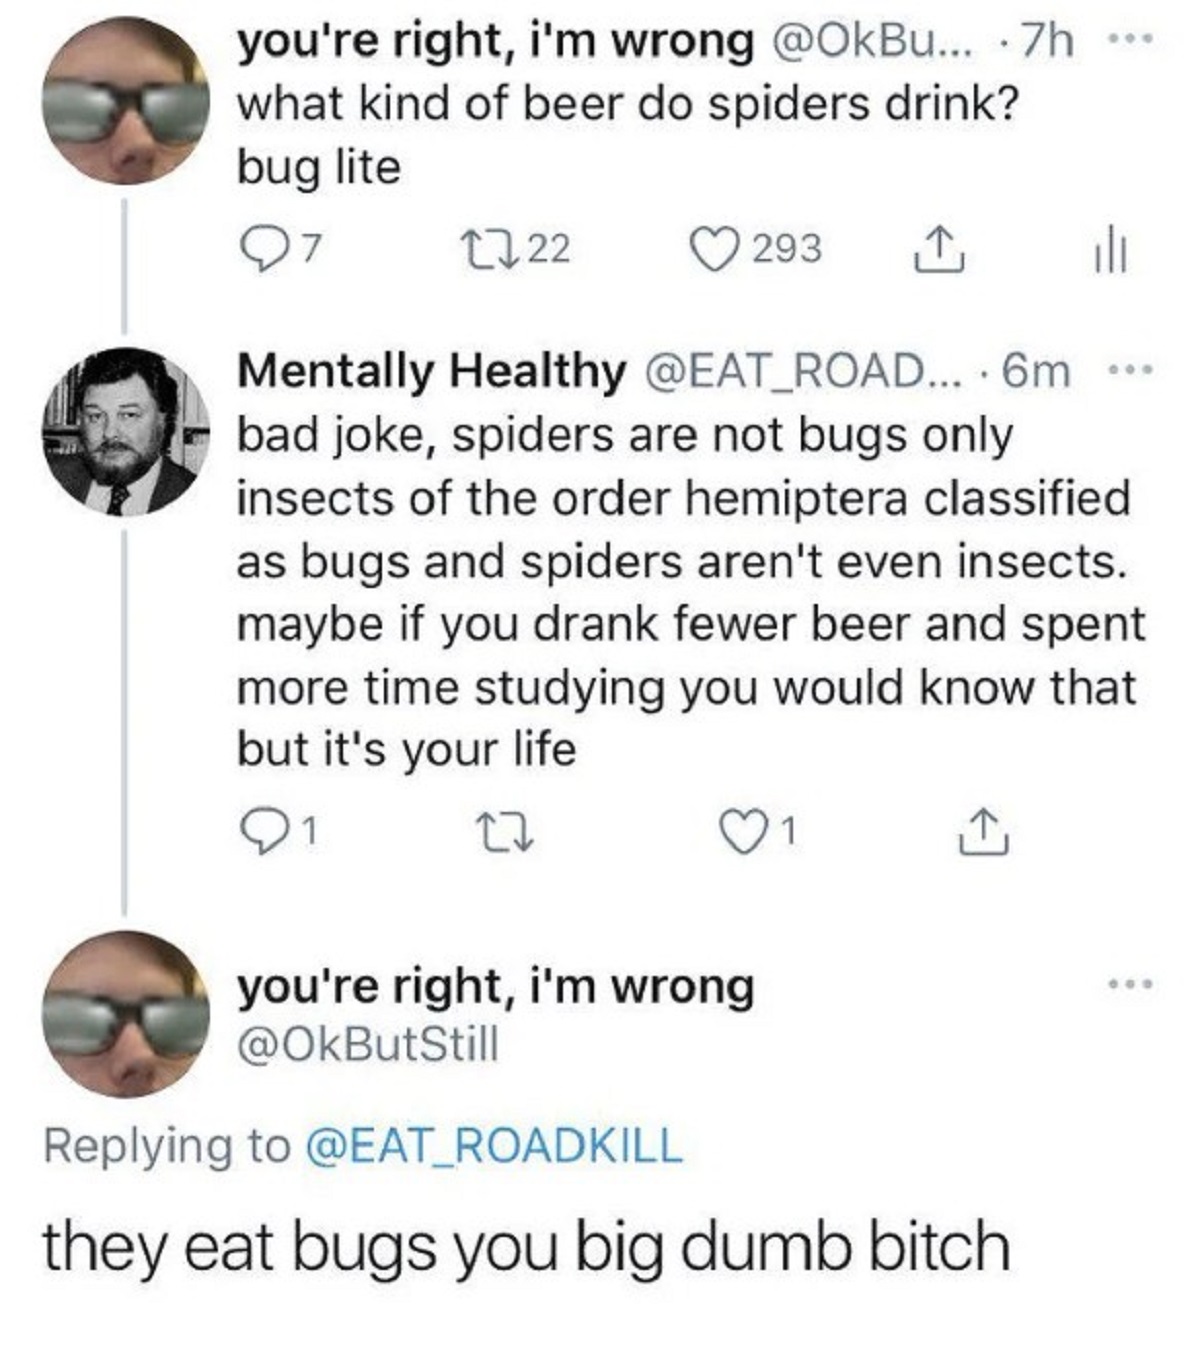 Meme - you're right, i'm wrong ... .7h... what kind of beer do spiders drink? bug lite 1722 293 Mentally Healthy Road....6m... bad joke, spiders are not bugs only insects of the order hemiptera classified as bugs and spiders aren't even insects. maybe if 